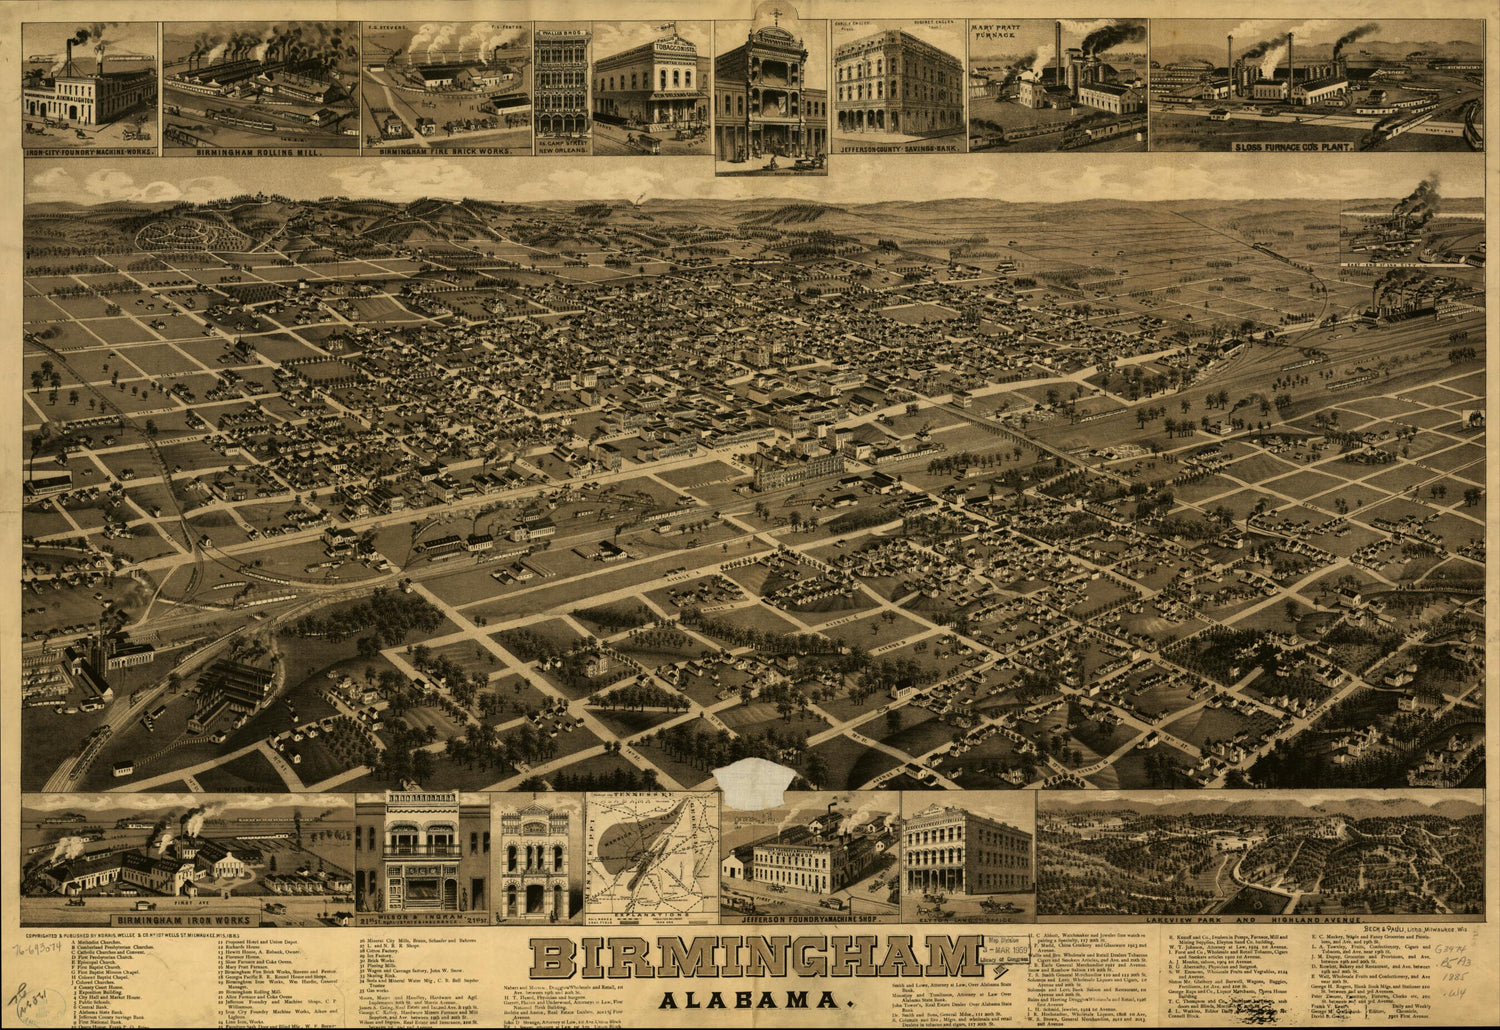 This old map of Birmingham, Alabama from 1885 was created by  Beck &amp; Pauli, Wellge &amp; Co Norris, H. (Henry) Wellge in 1885